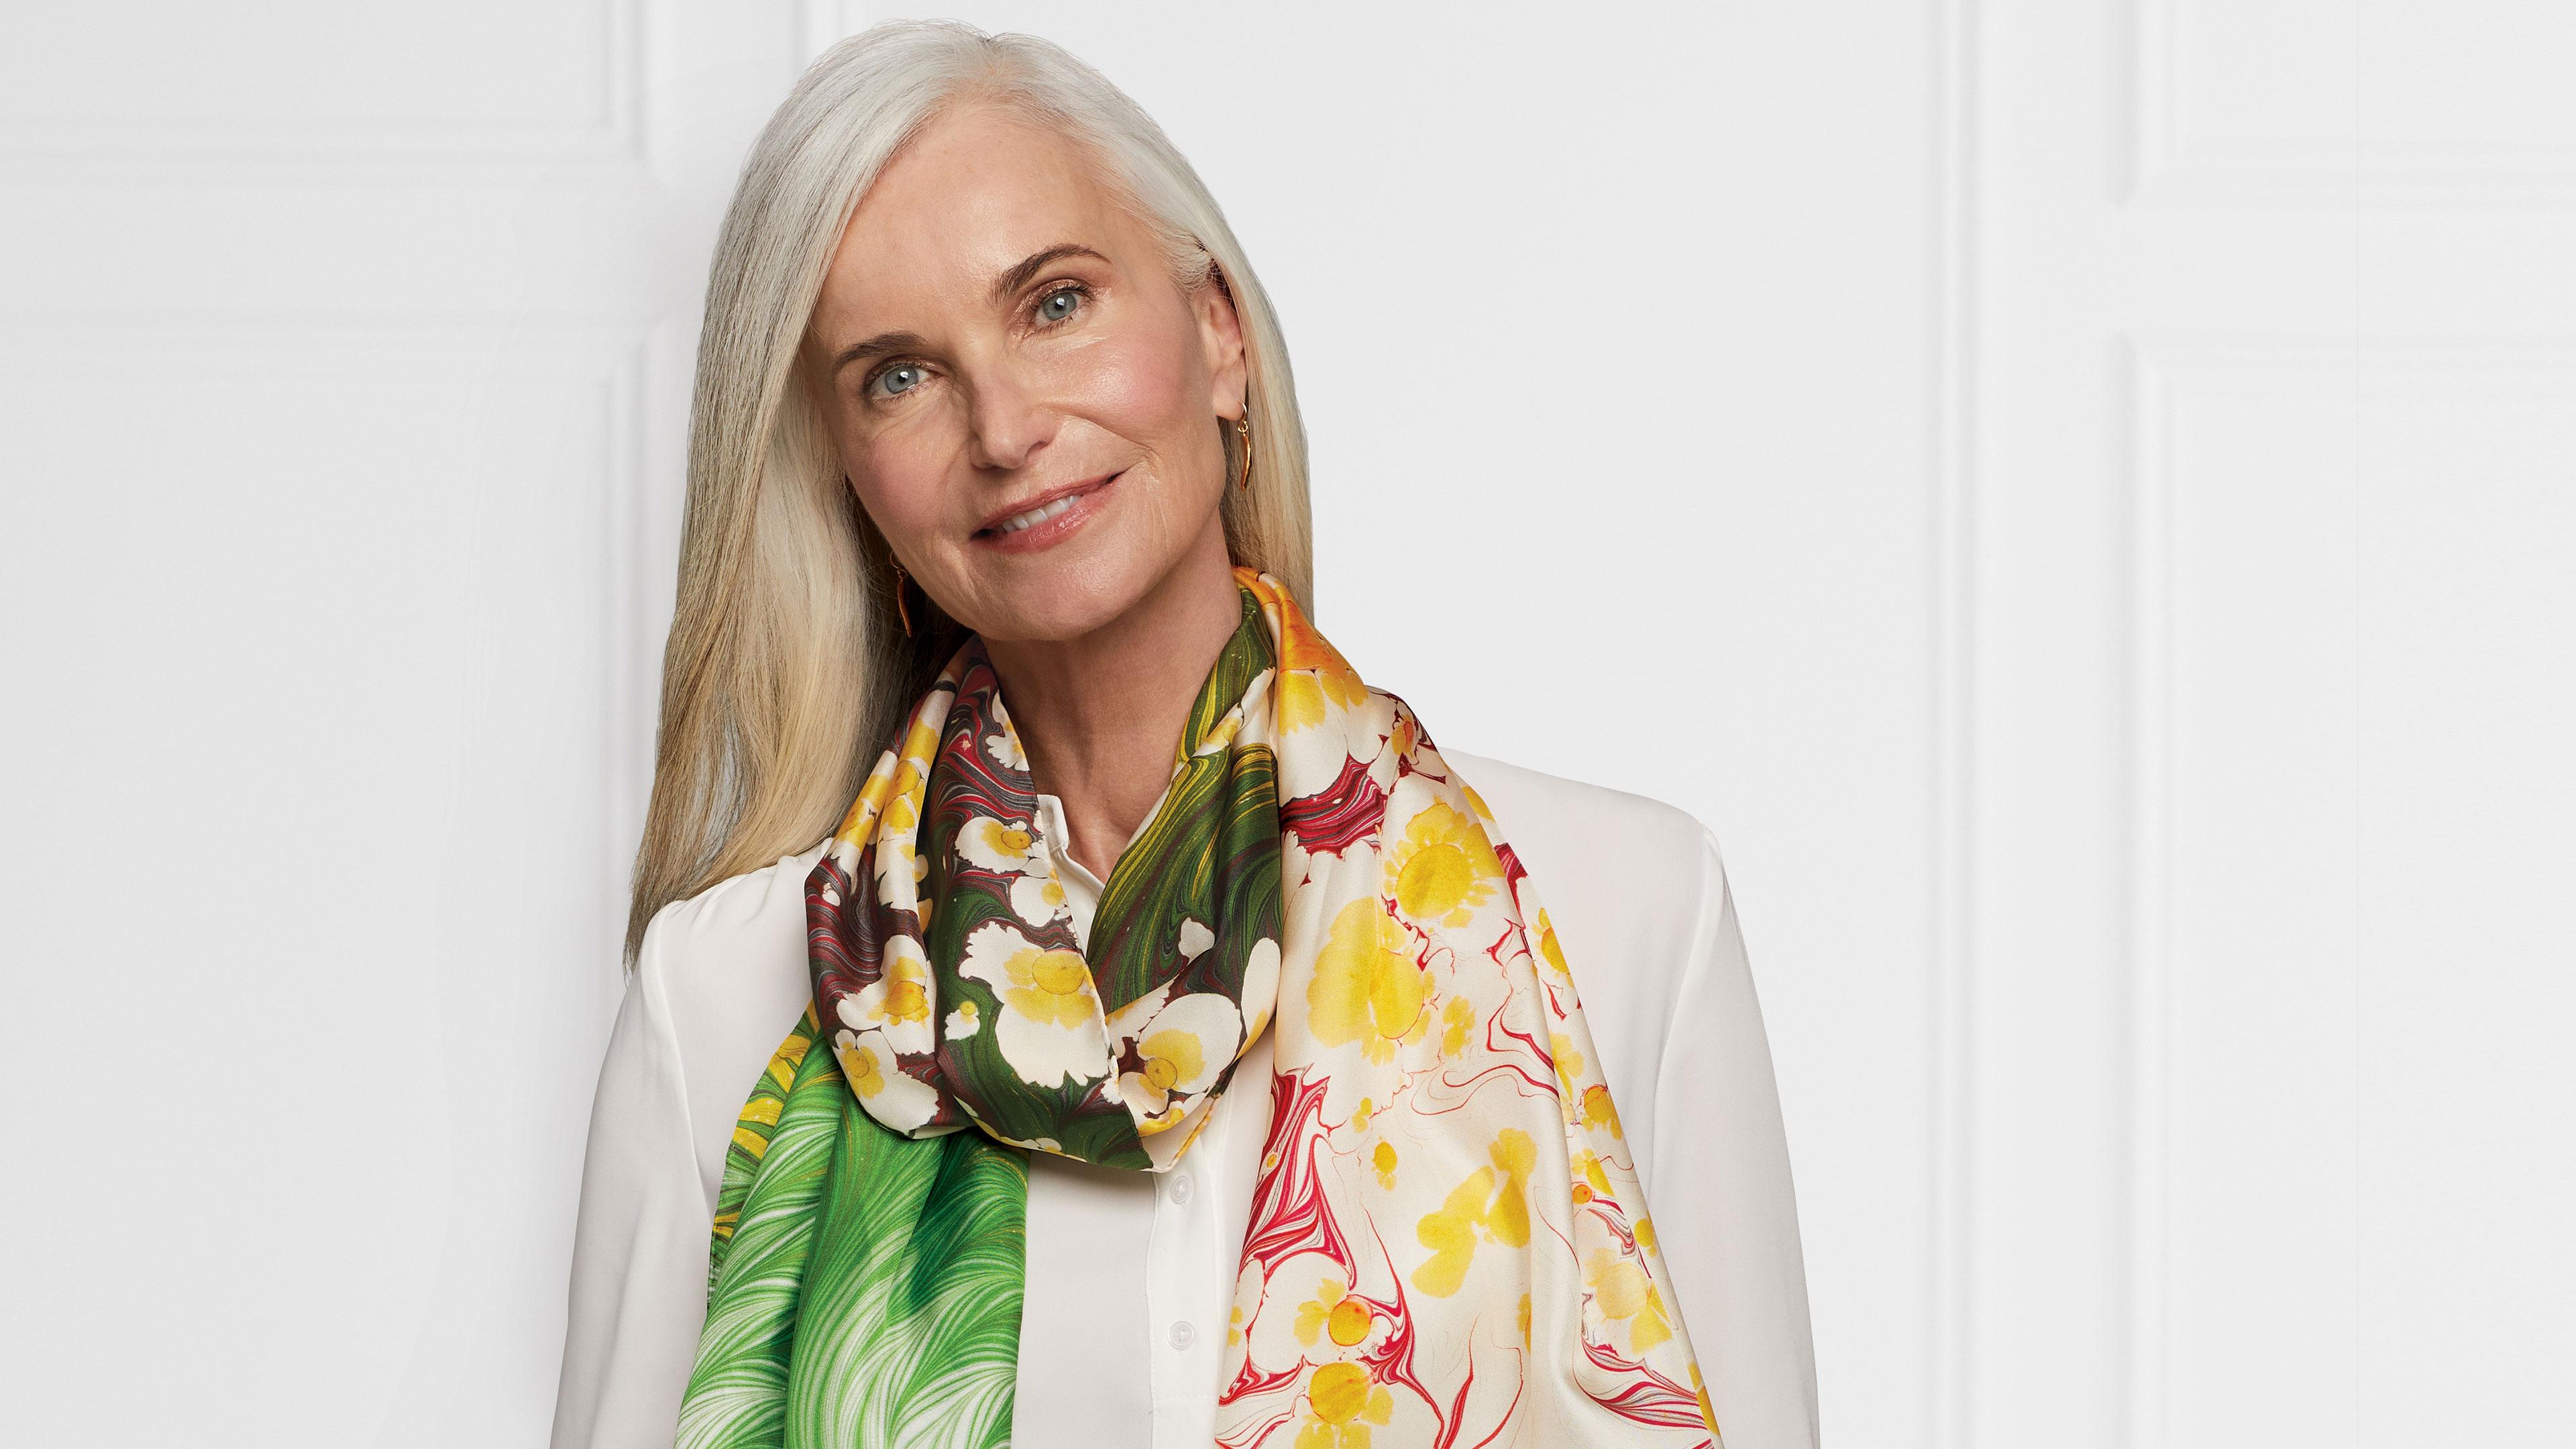 Person wearing a colorful floral scarf from The Met Store